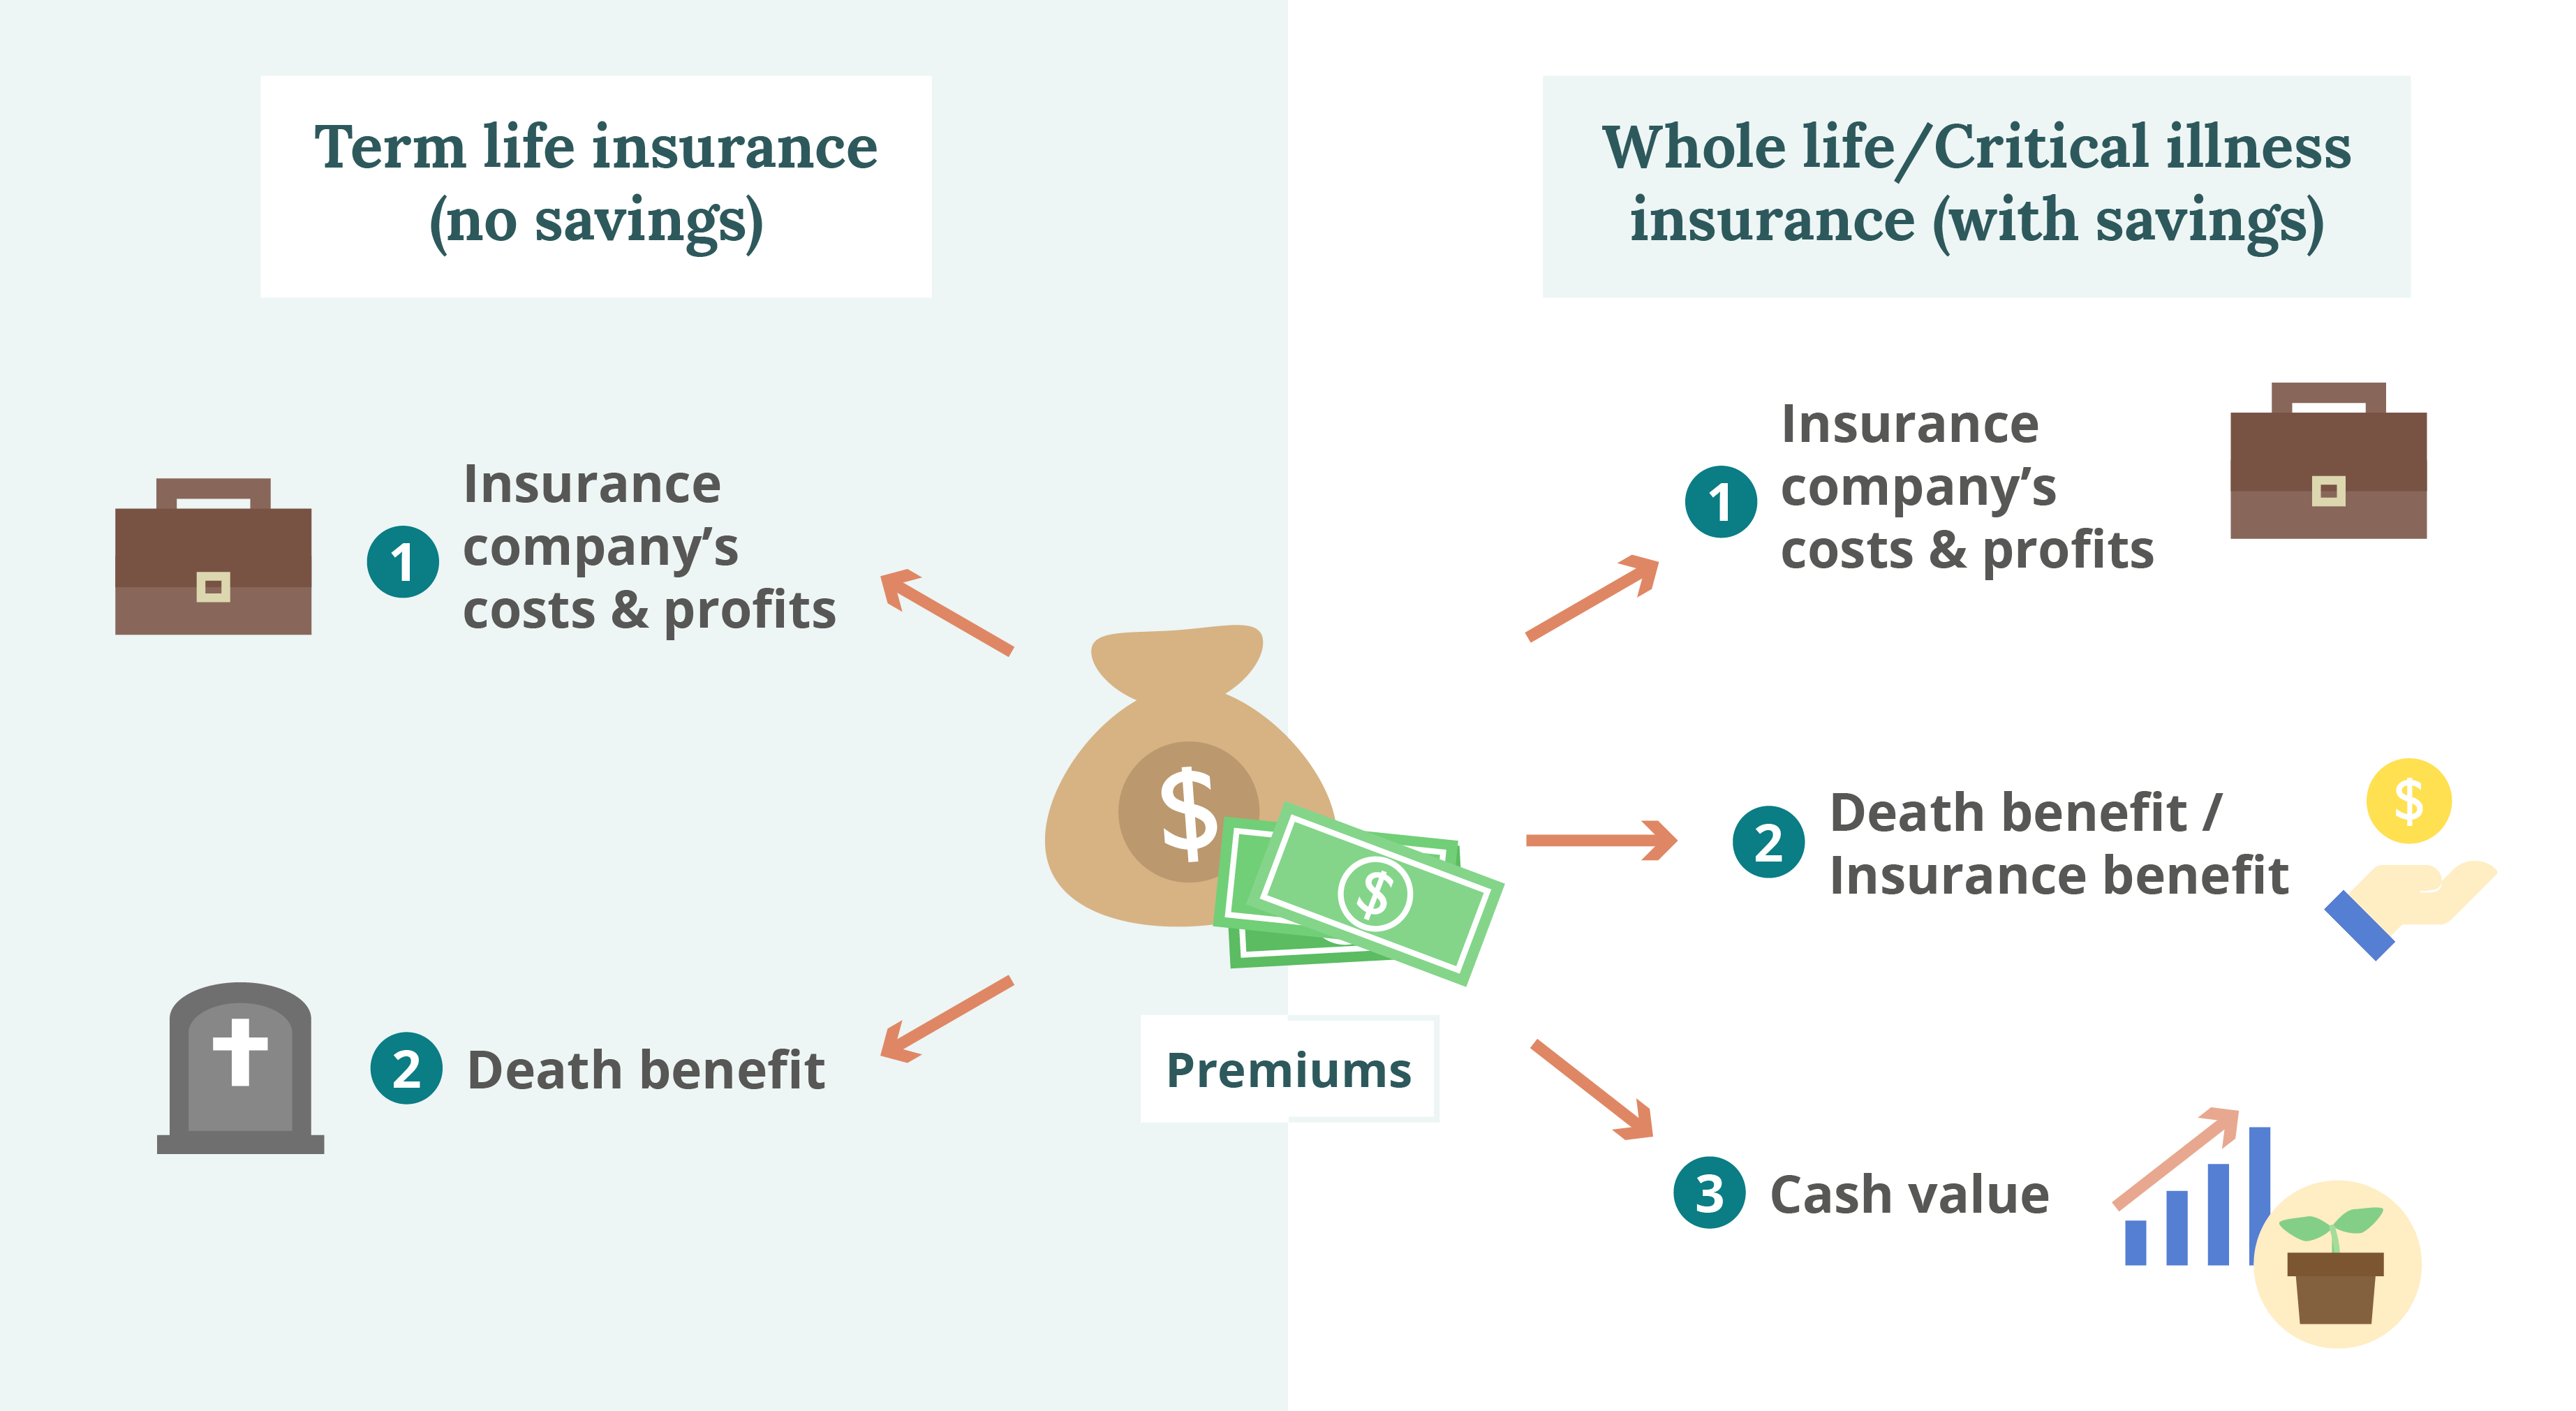 infographic comparing how premiums are used in term life insurance vs. whole life and critical illness insurance